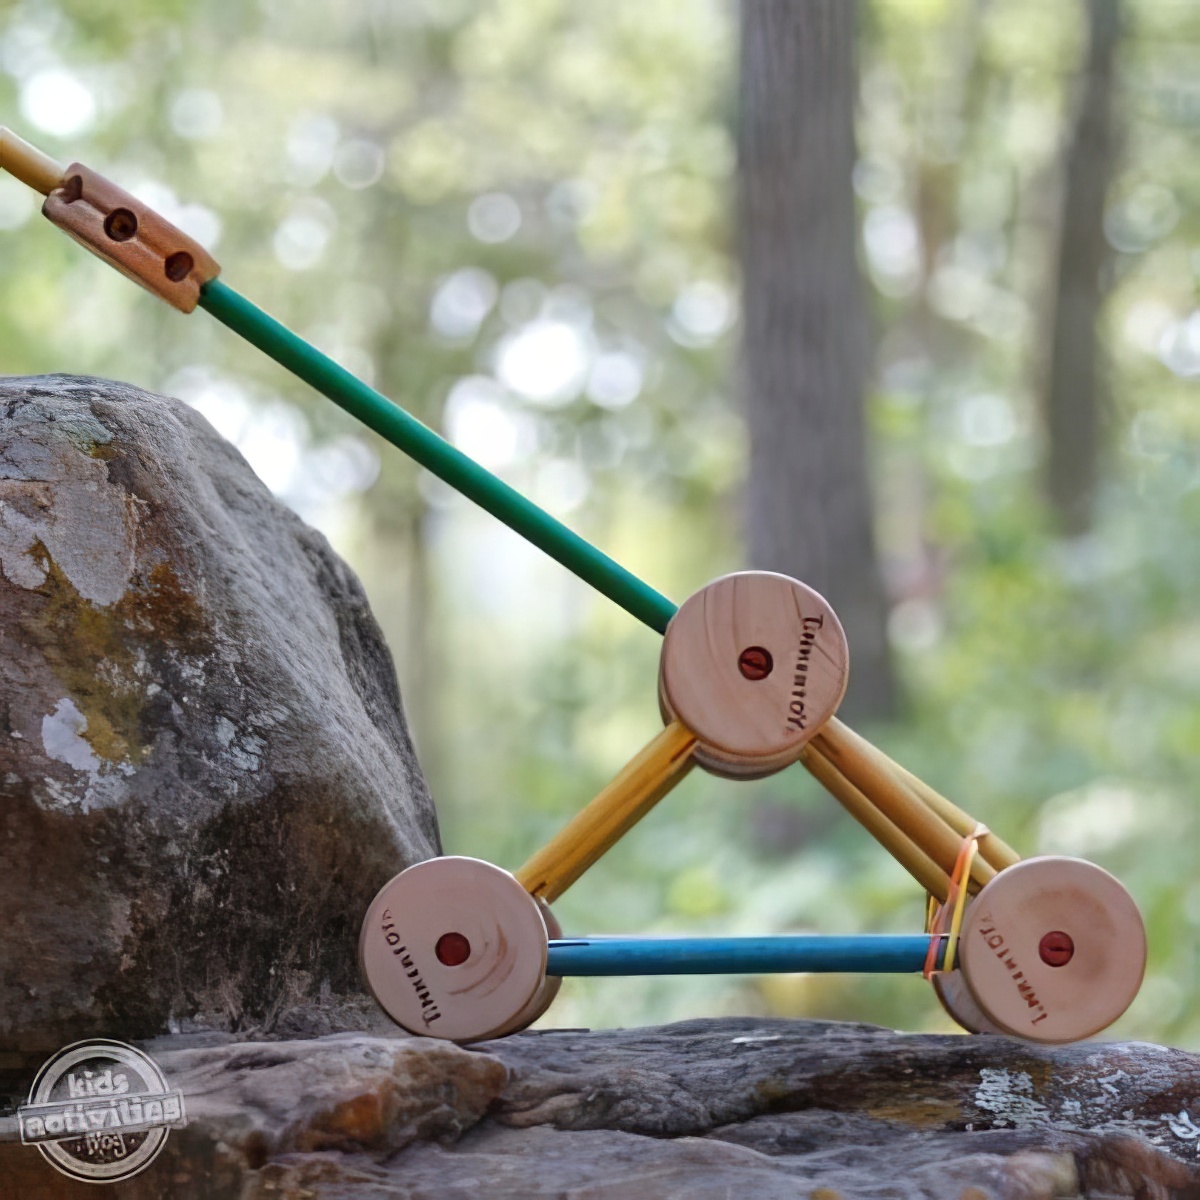 Tinker Toy Catapult for Spoonful - Kids Activities Blog, science experiment catapult